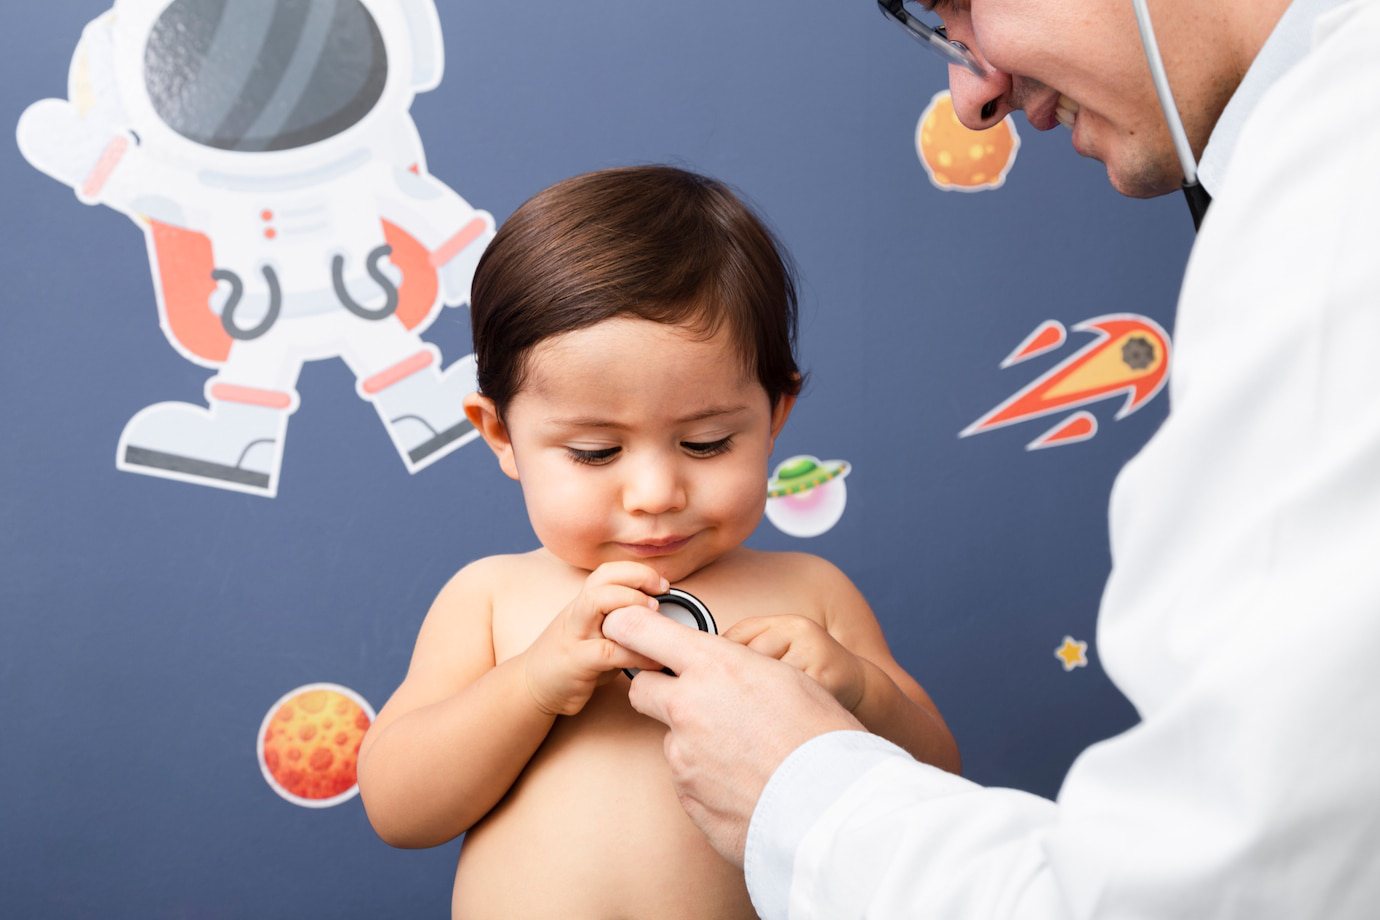 How To Control Obesity In Kids With Doctor’s Tips?